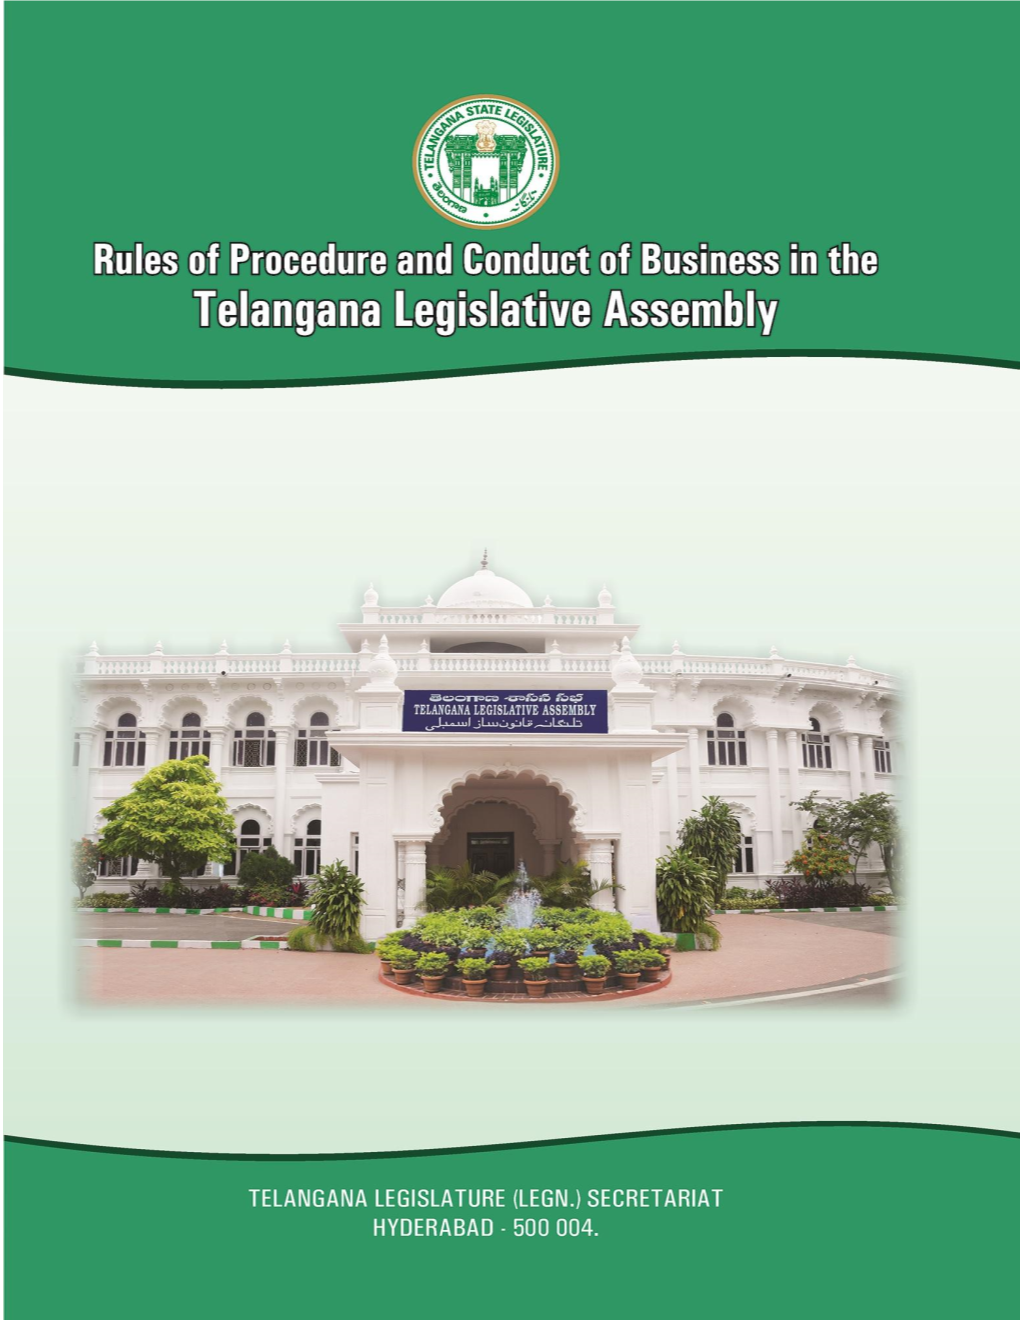 Rules of Procedure and Conduct of Business in the Telangana Legislative Assembly Were Made Effective from 18Th March, 2015